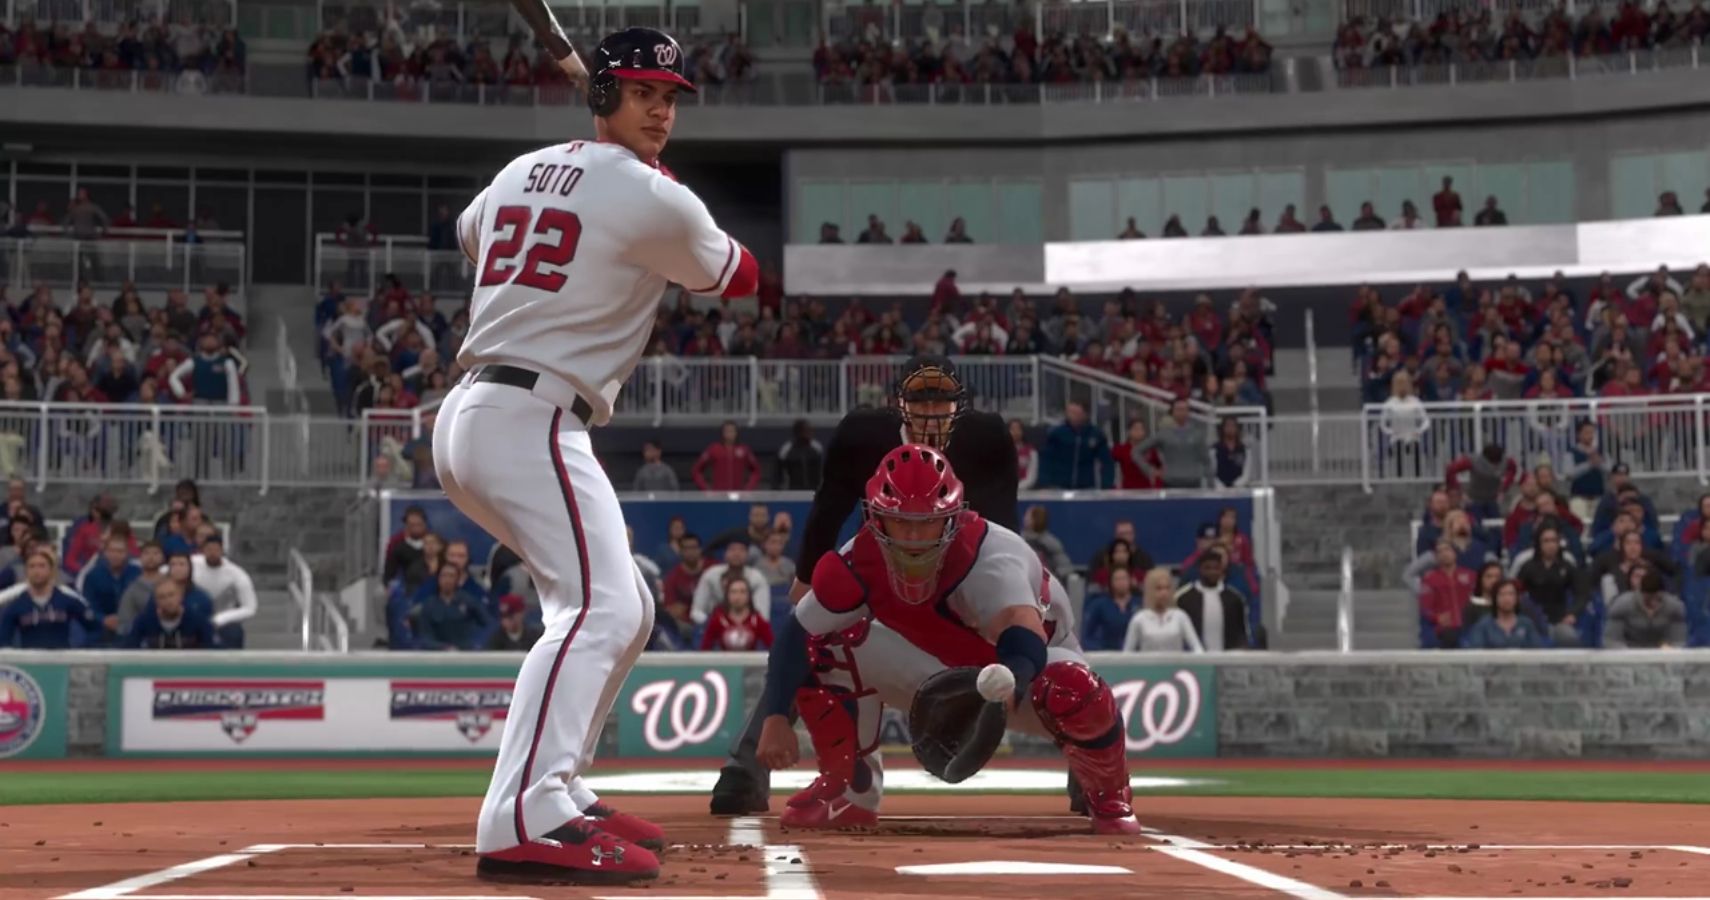 mlb the show 21 xbox digital download